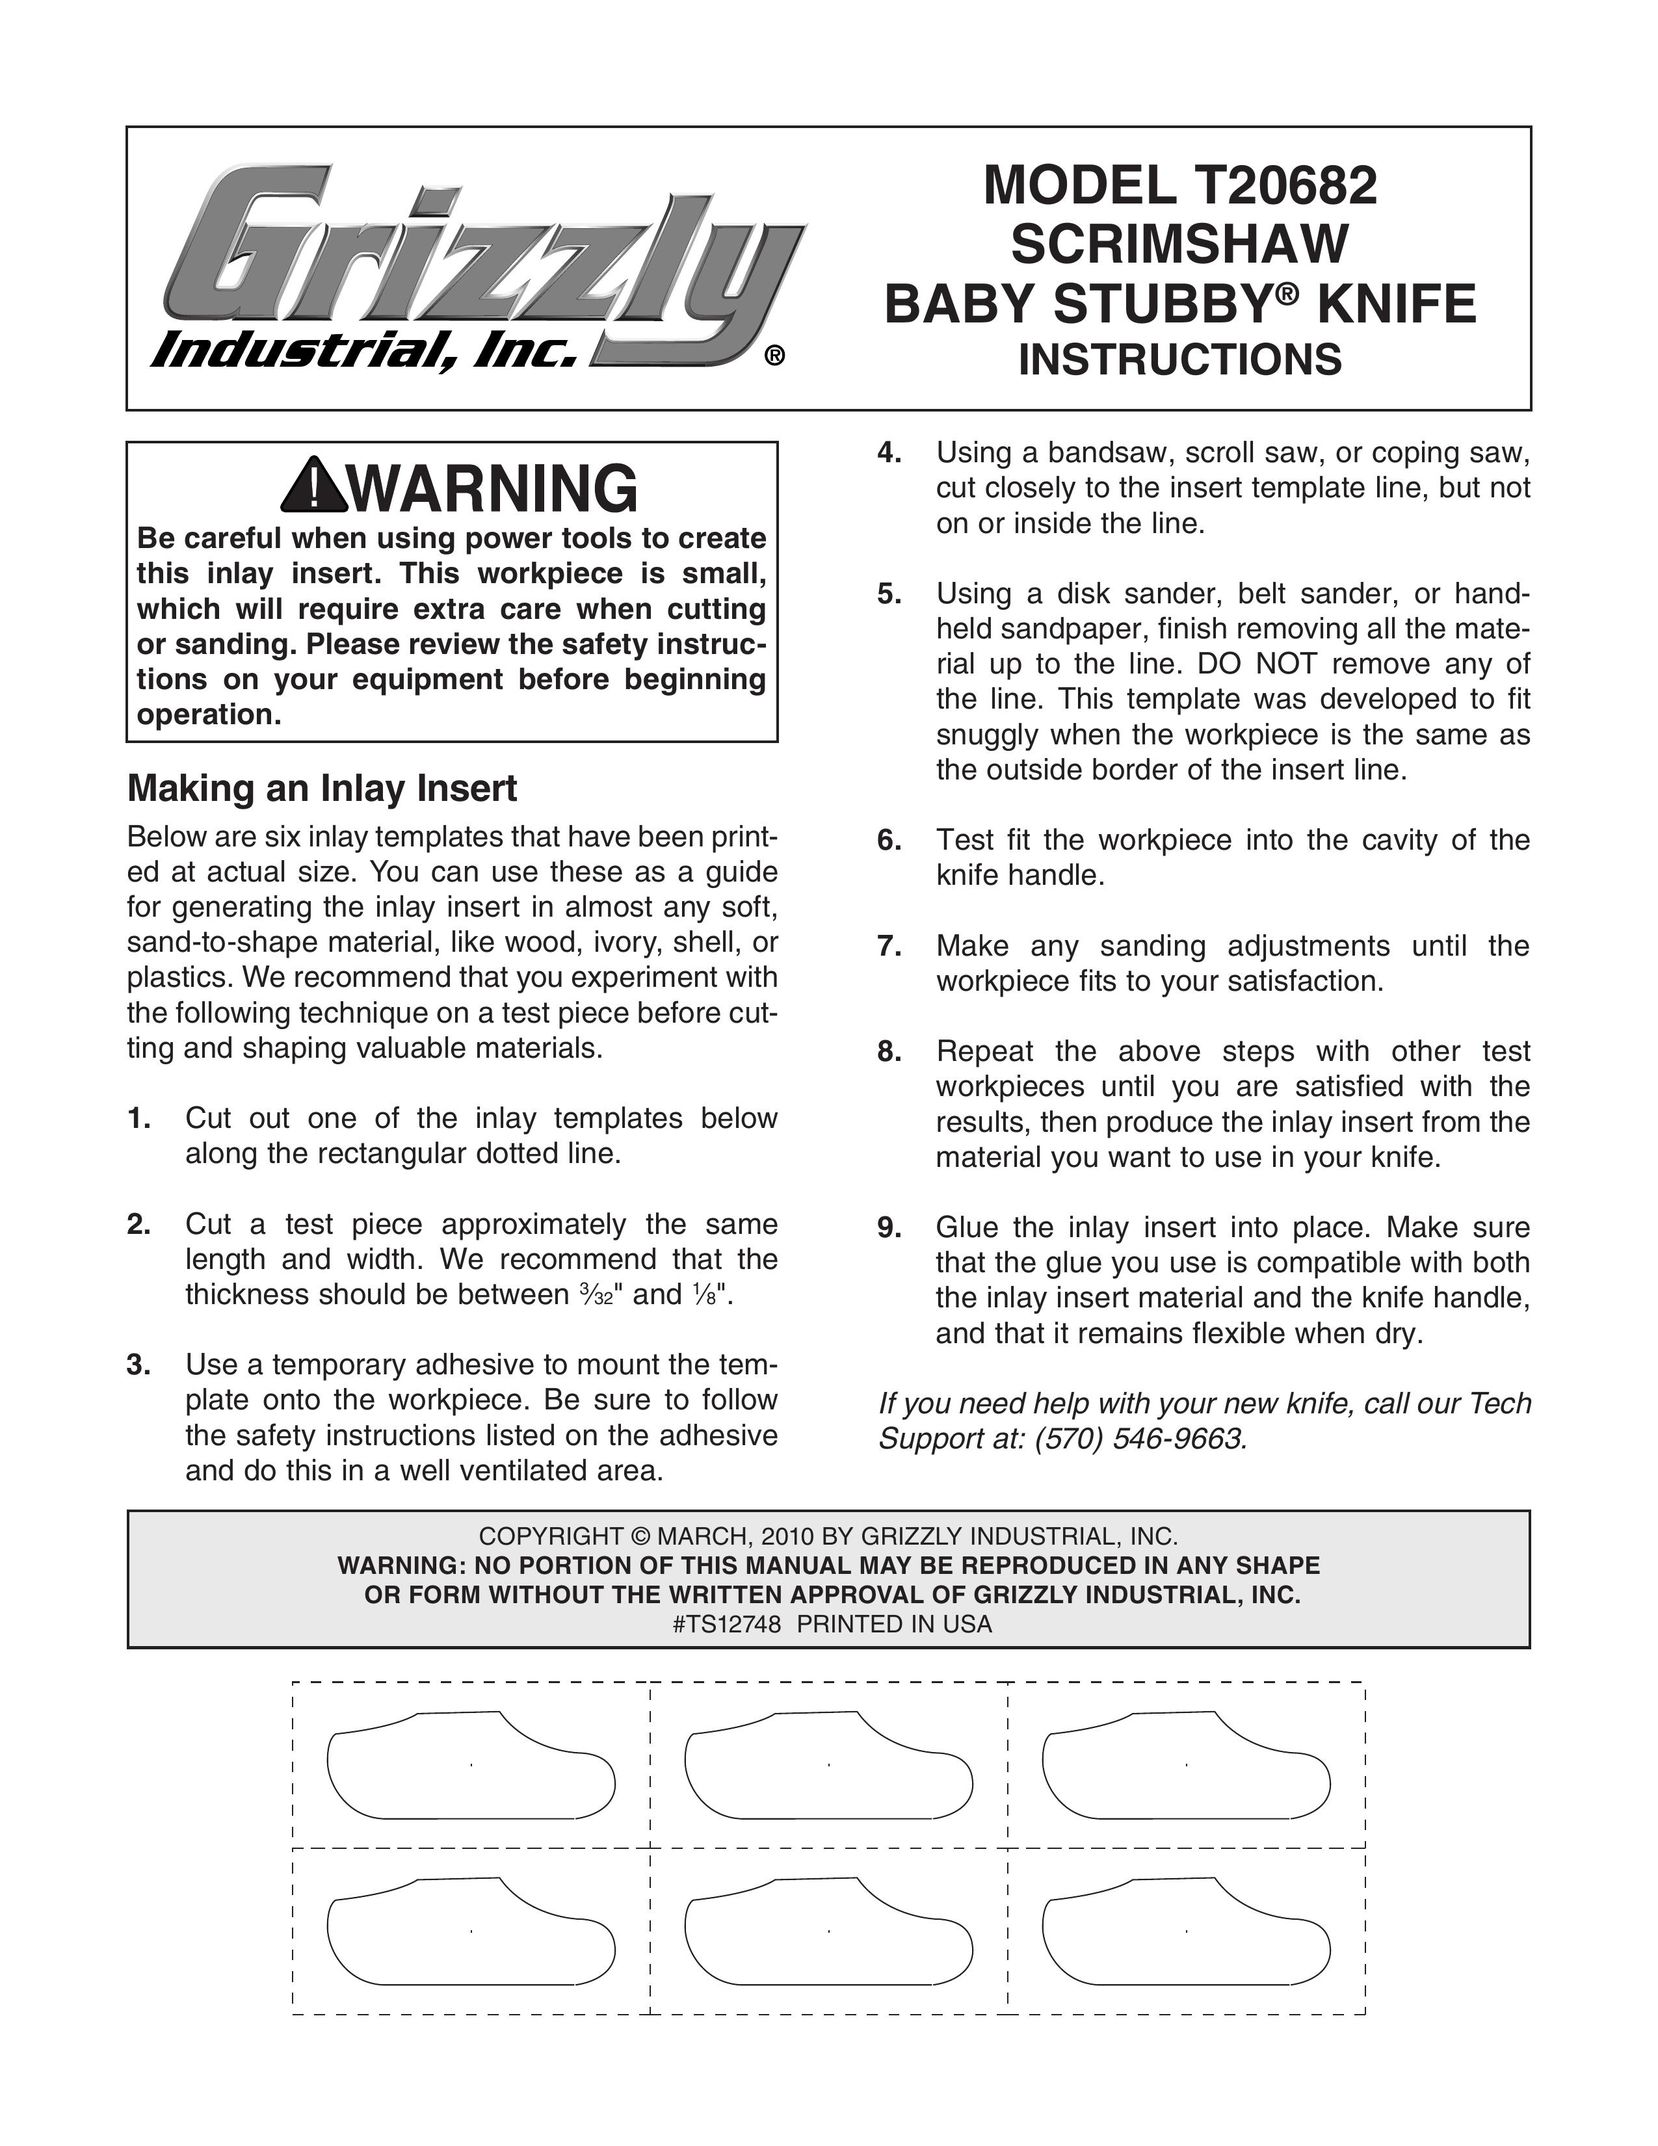 Grizzly T20682 Kitchen Utensil User Manual